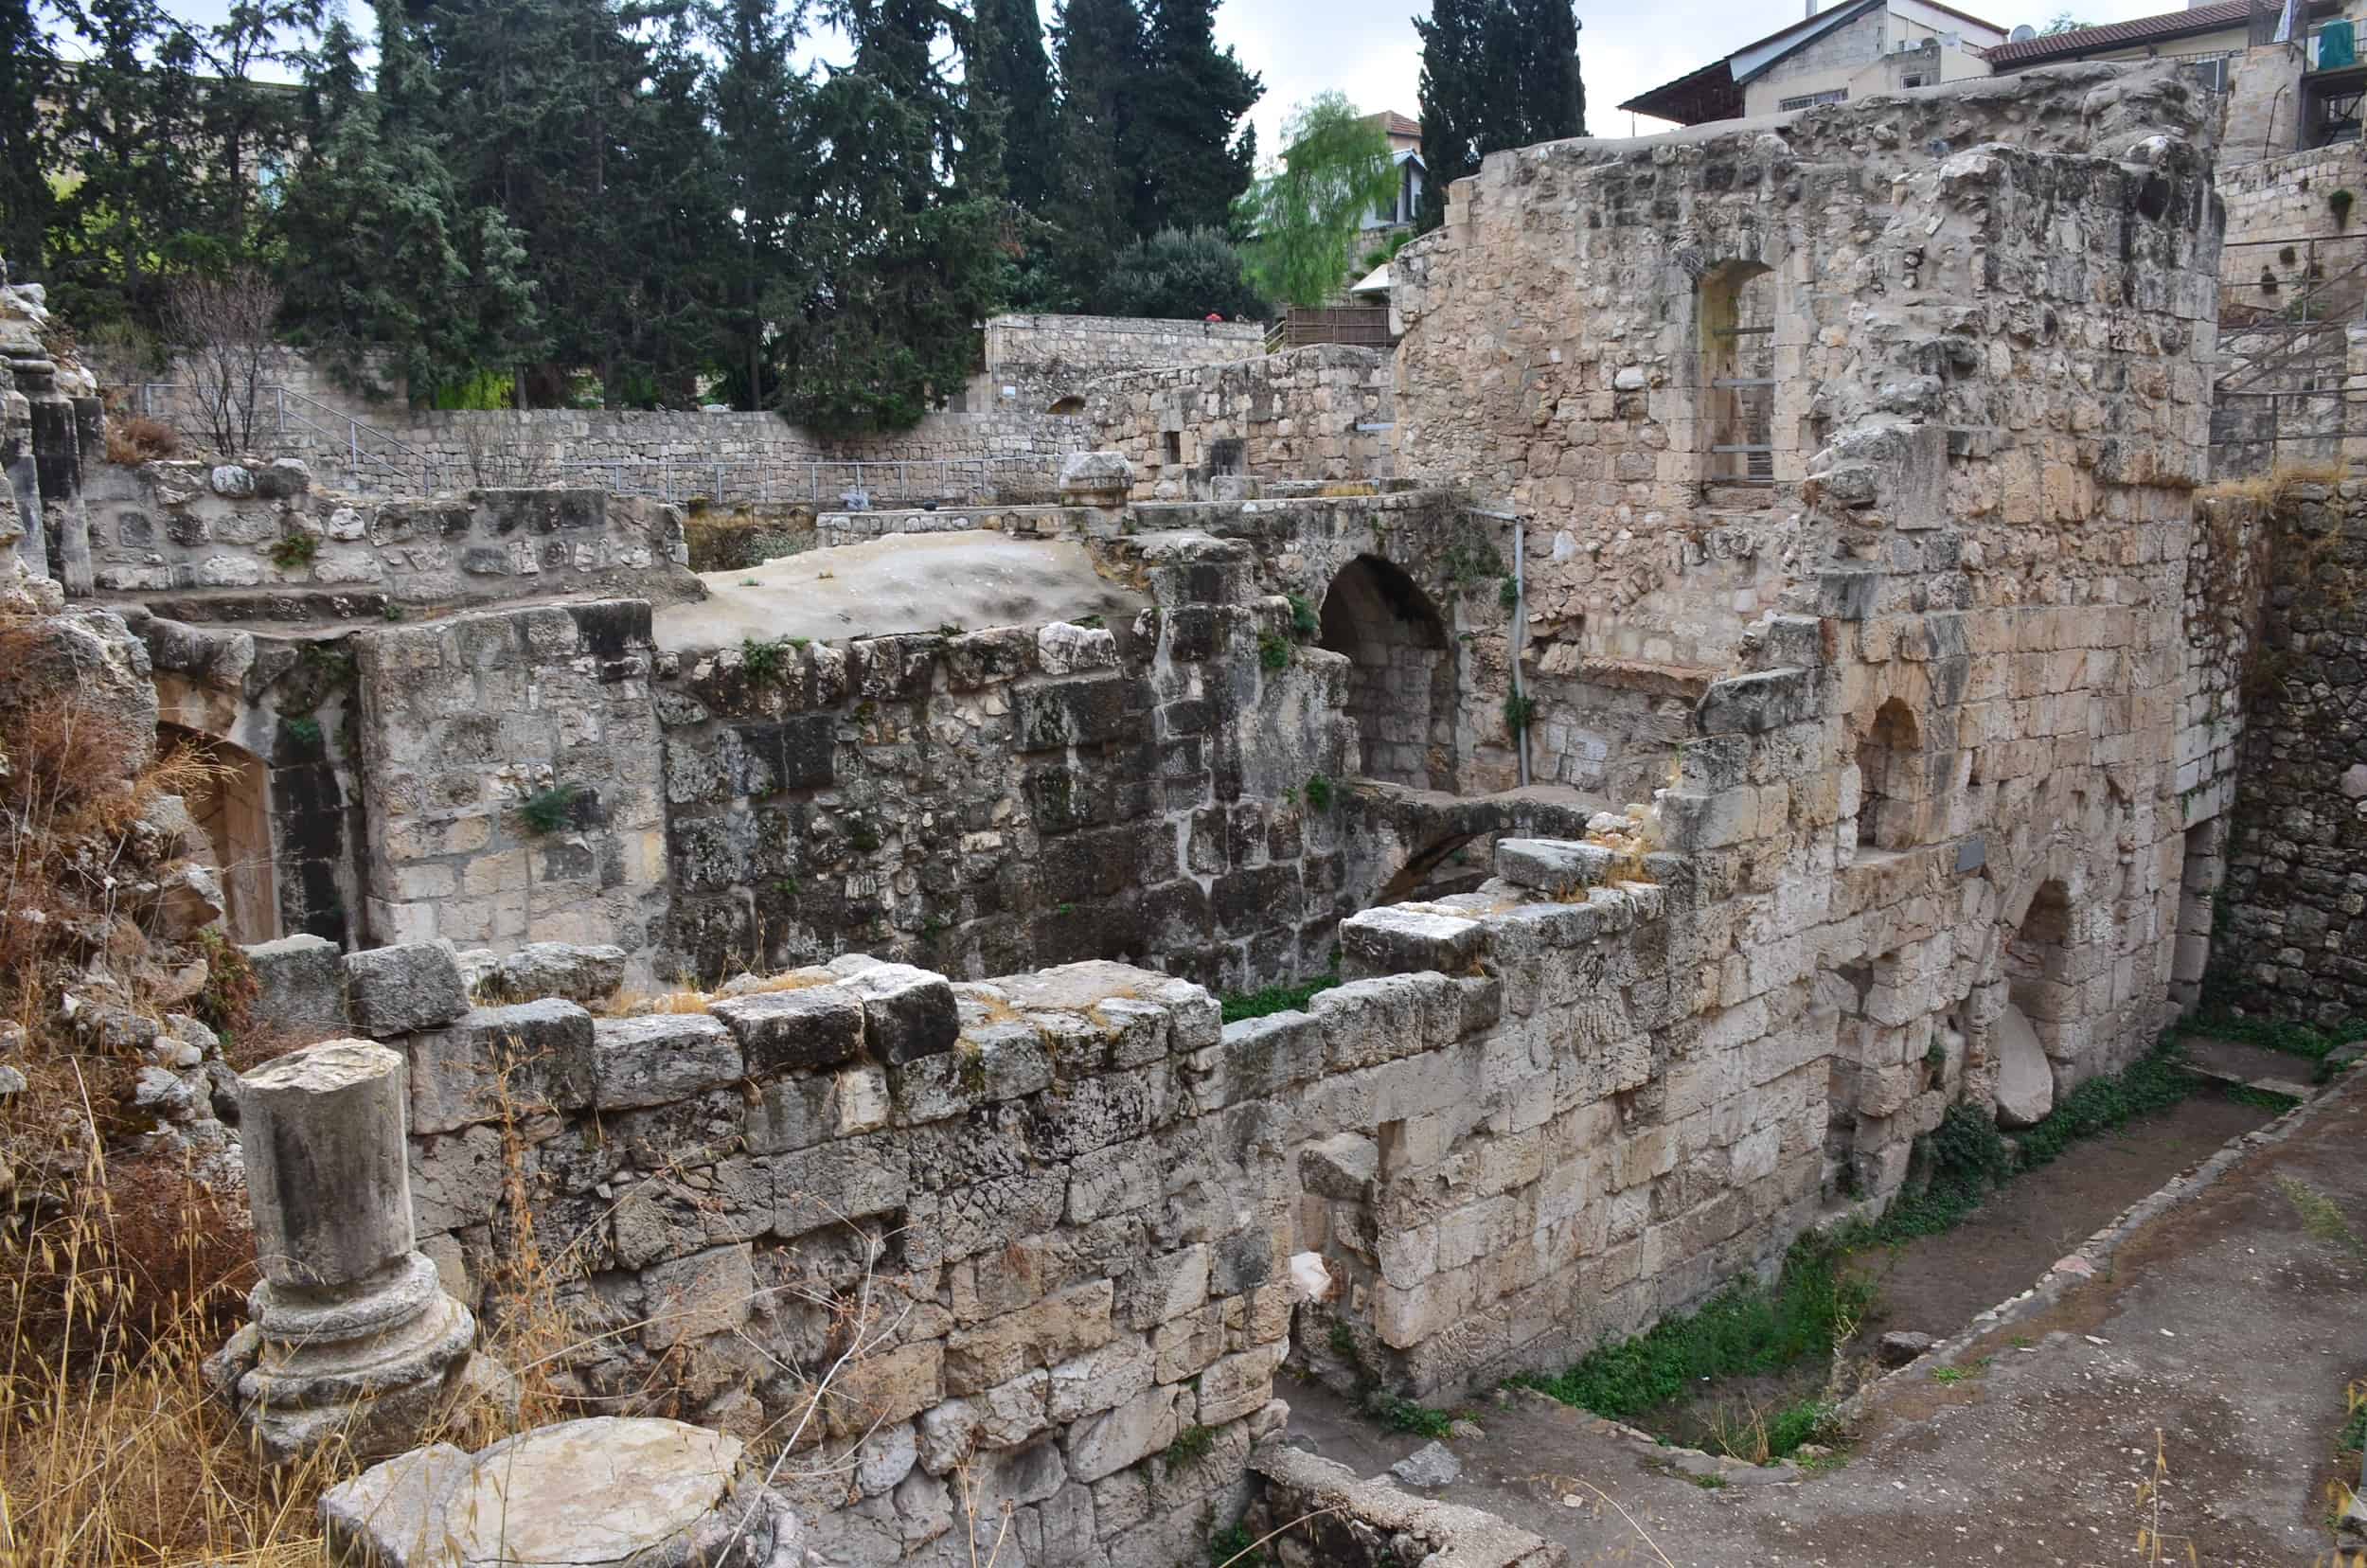 Church of the Paralytic and northern pool (right corner) at the Pools of Bethesda